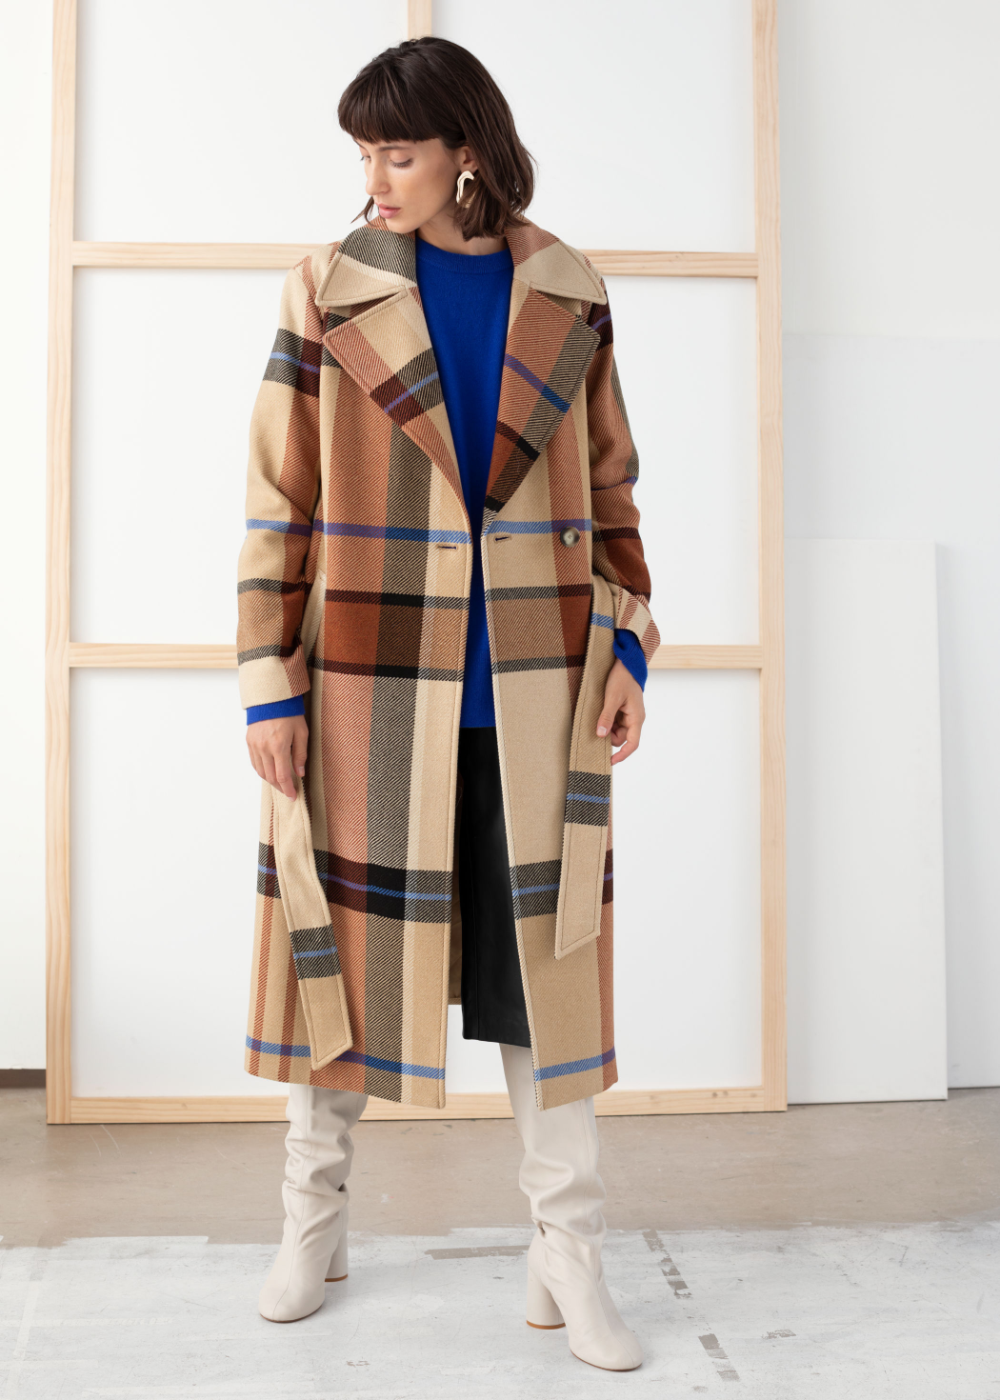 And other stories Plaid Wool Blend Belted Long Coat - And other stories Plaid Wool Blend Belted Long Coat -   18 style Winter coat ideas